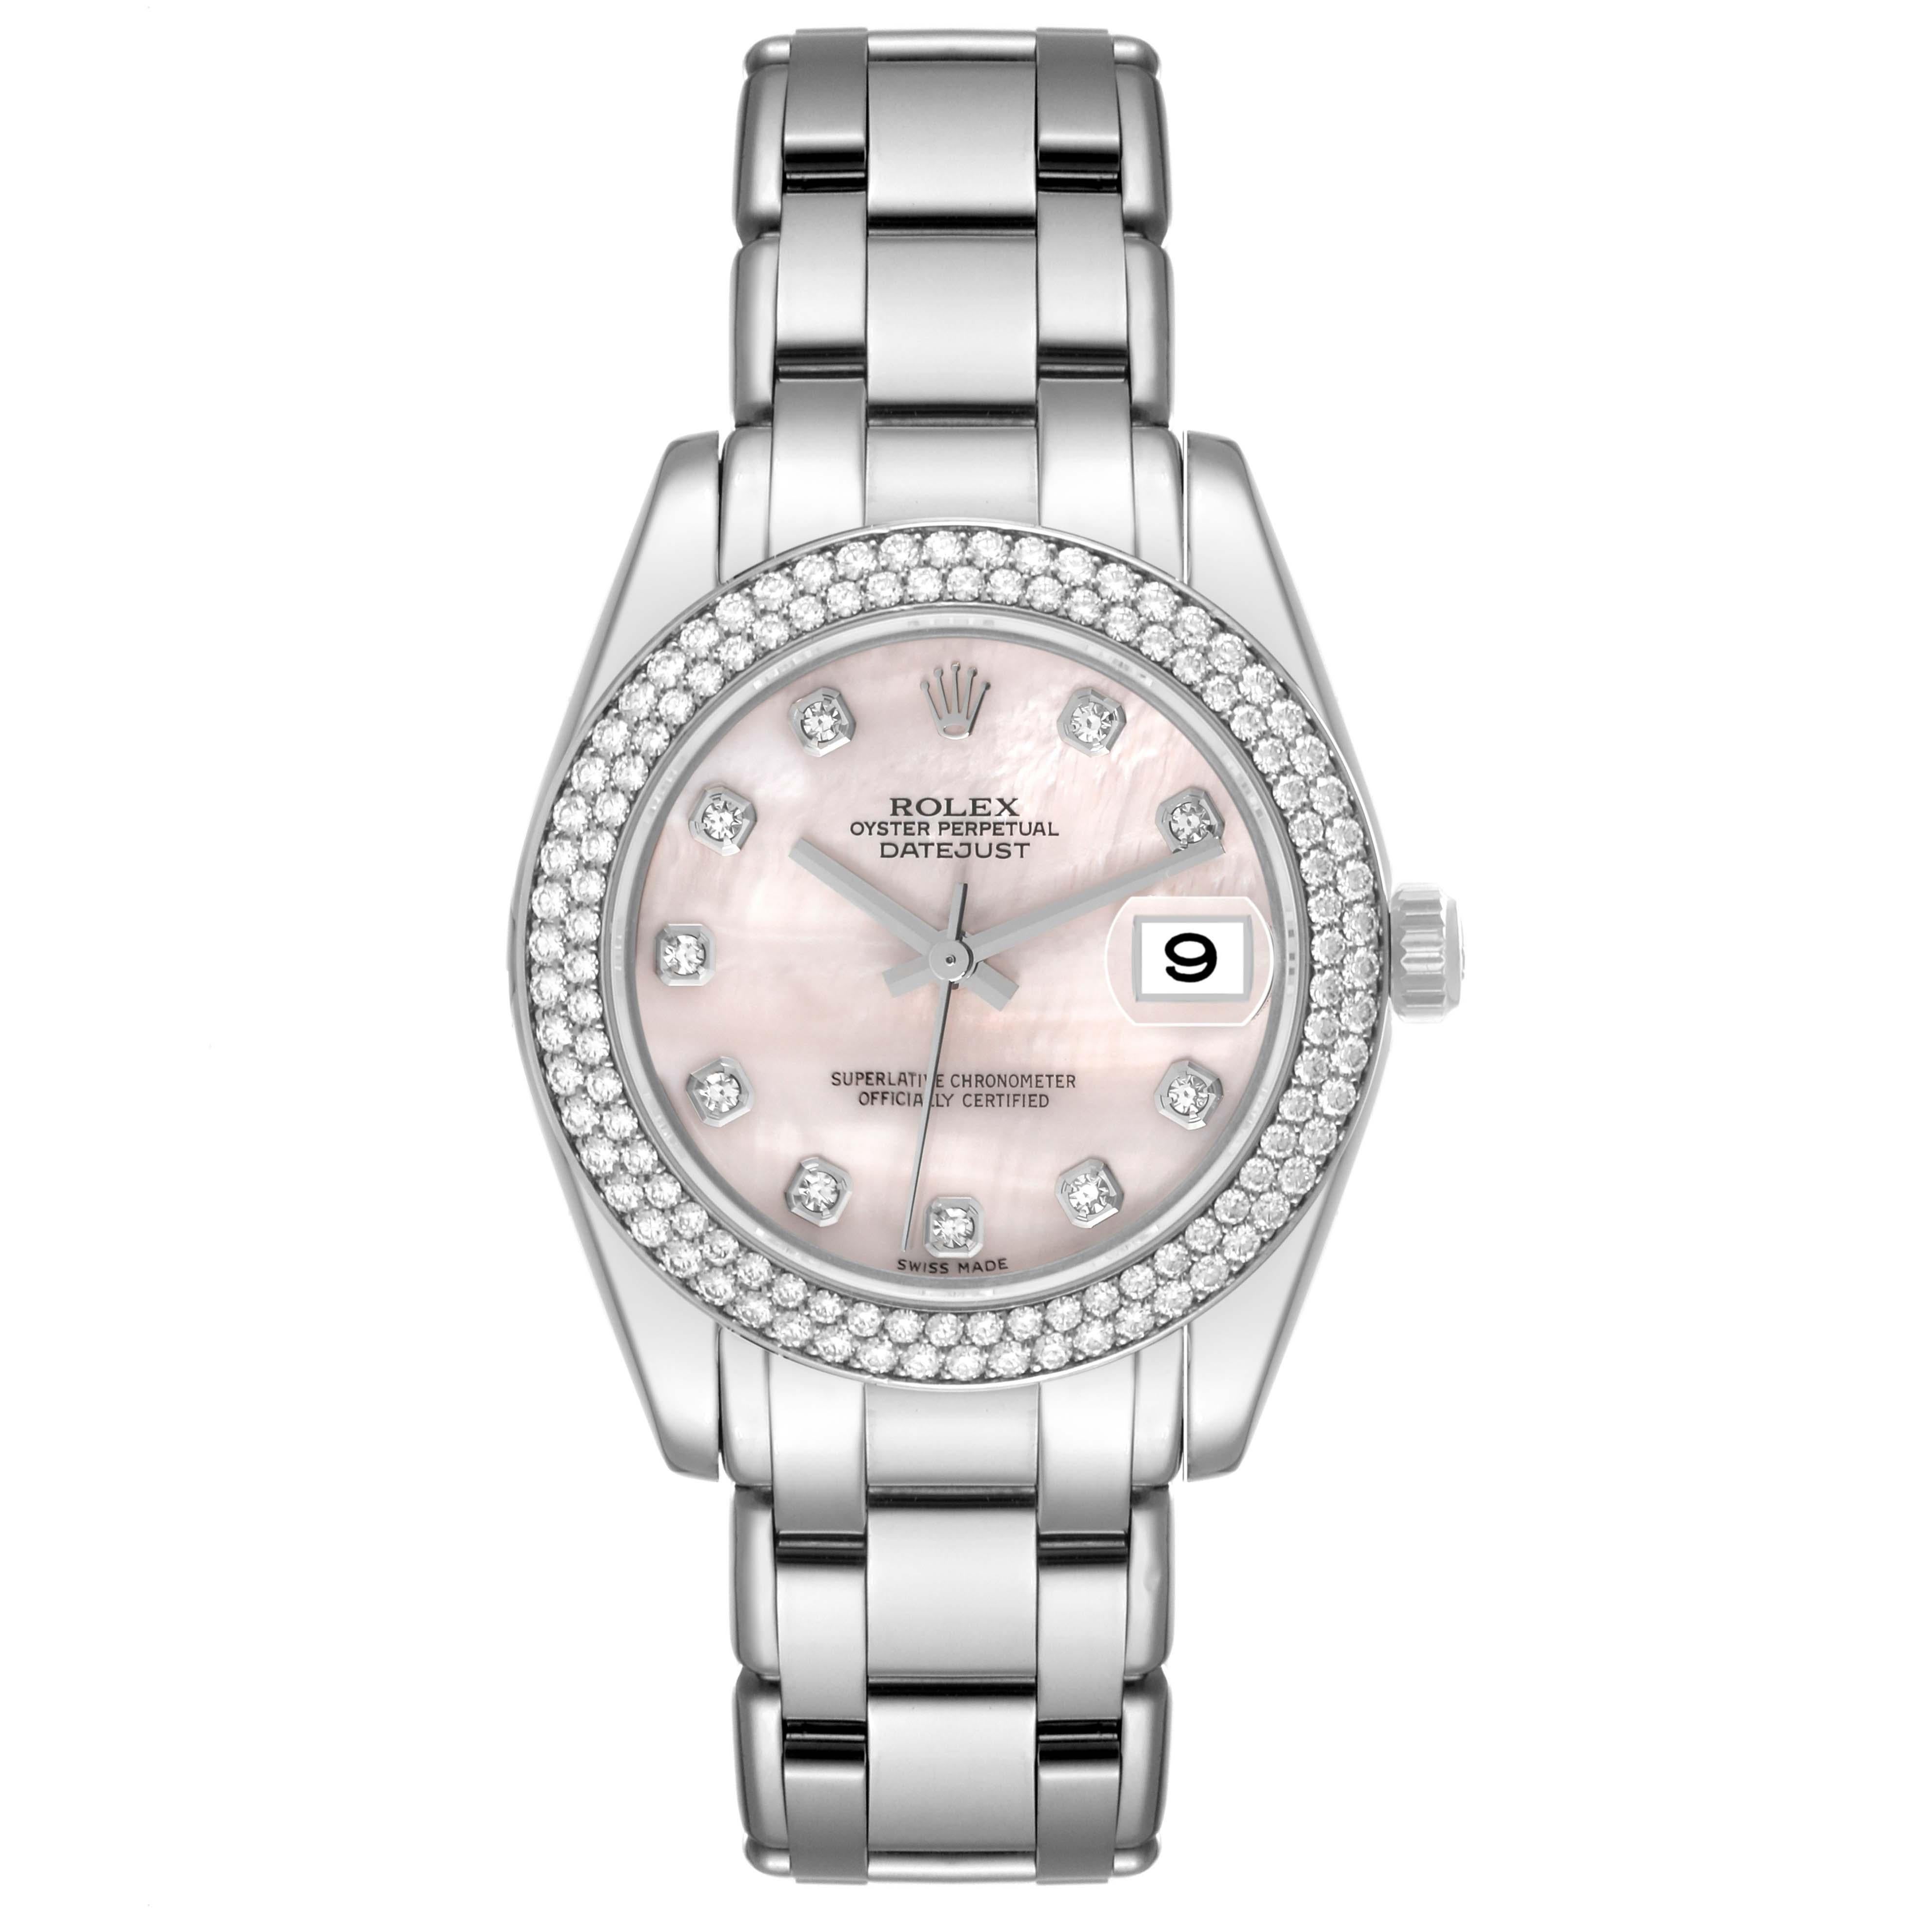 Rolex Pearlmaster 34 White Gold Diamond MOP Dial Ladies Watch 81339. Officially certified chronometer self-winding movement. 18k white gold oyster case 34.0 mm in diameter. Rolex logo on the crown. Original Rolex factory diamond bezel. Scratch